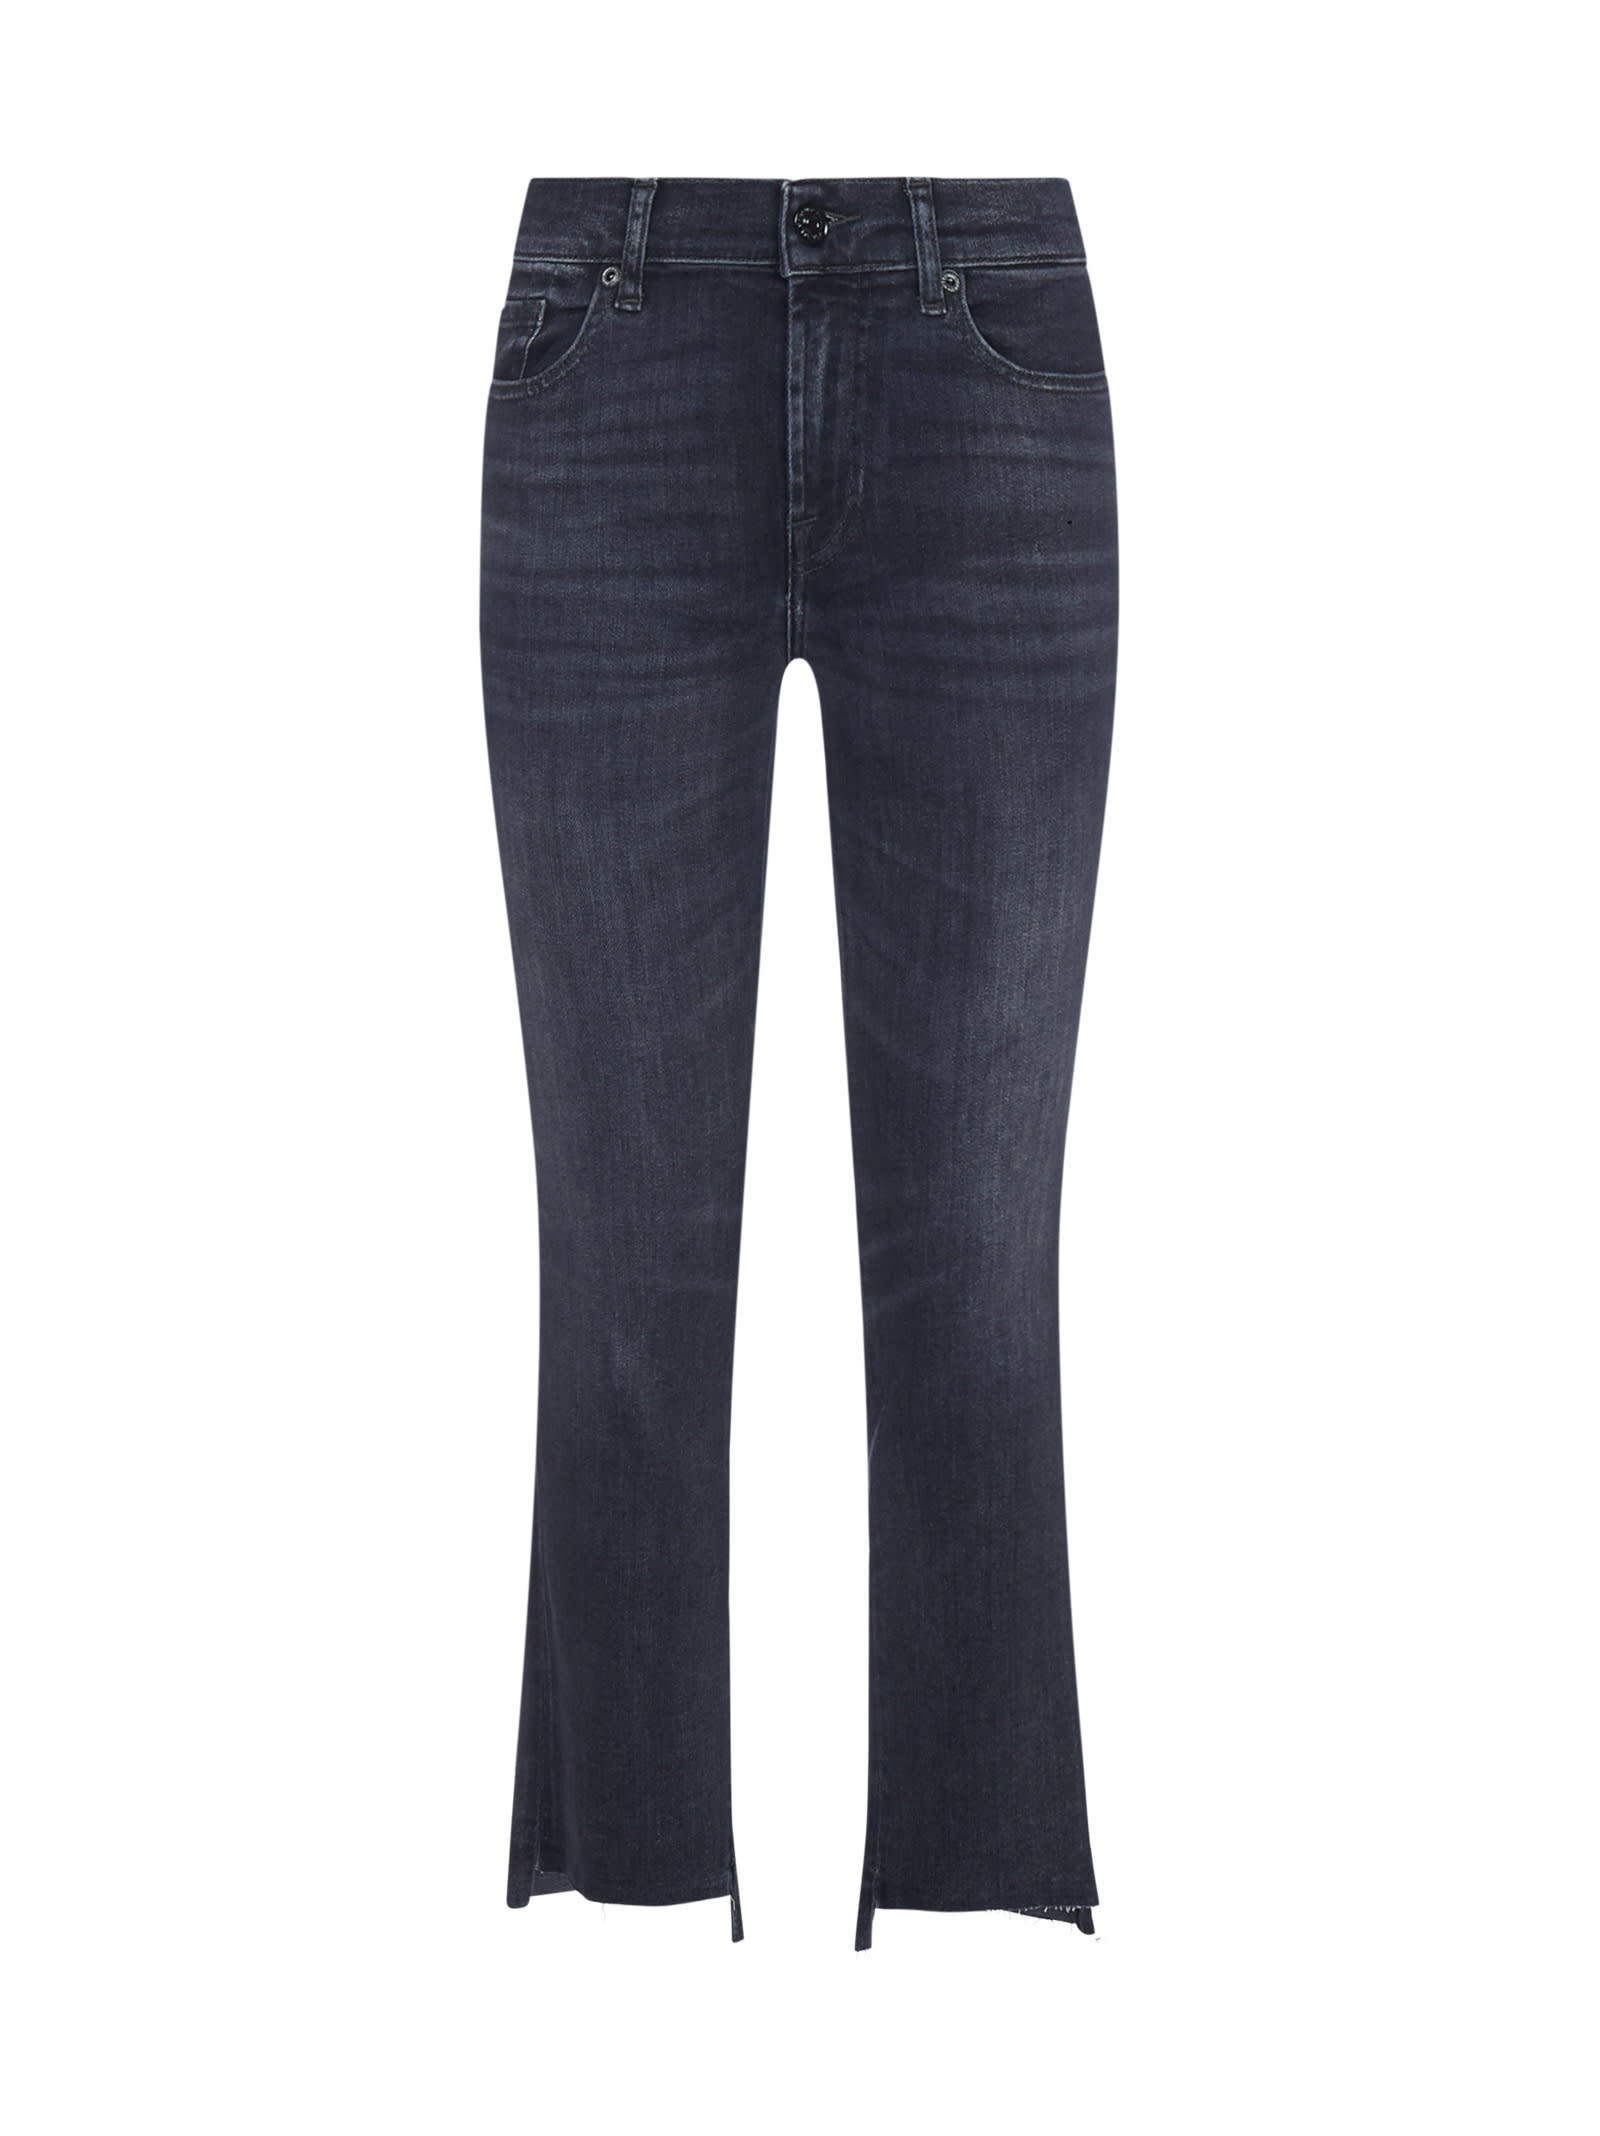 7 For All Mankind Ankle Boot Slim Cropped Jeans